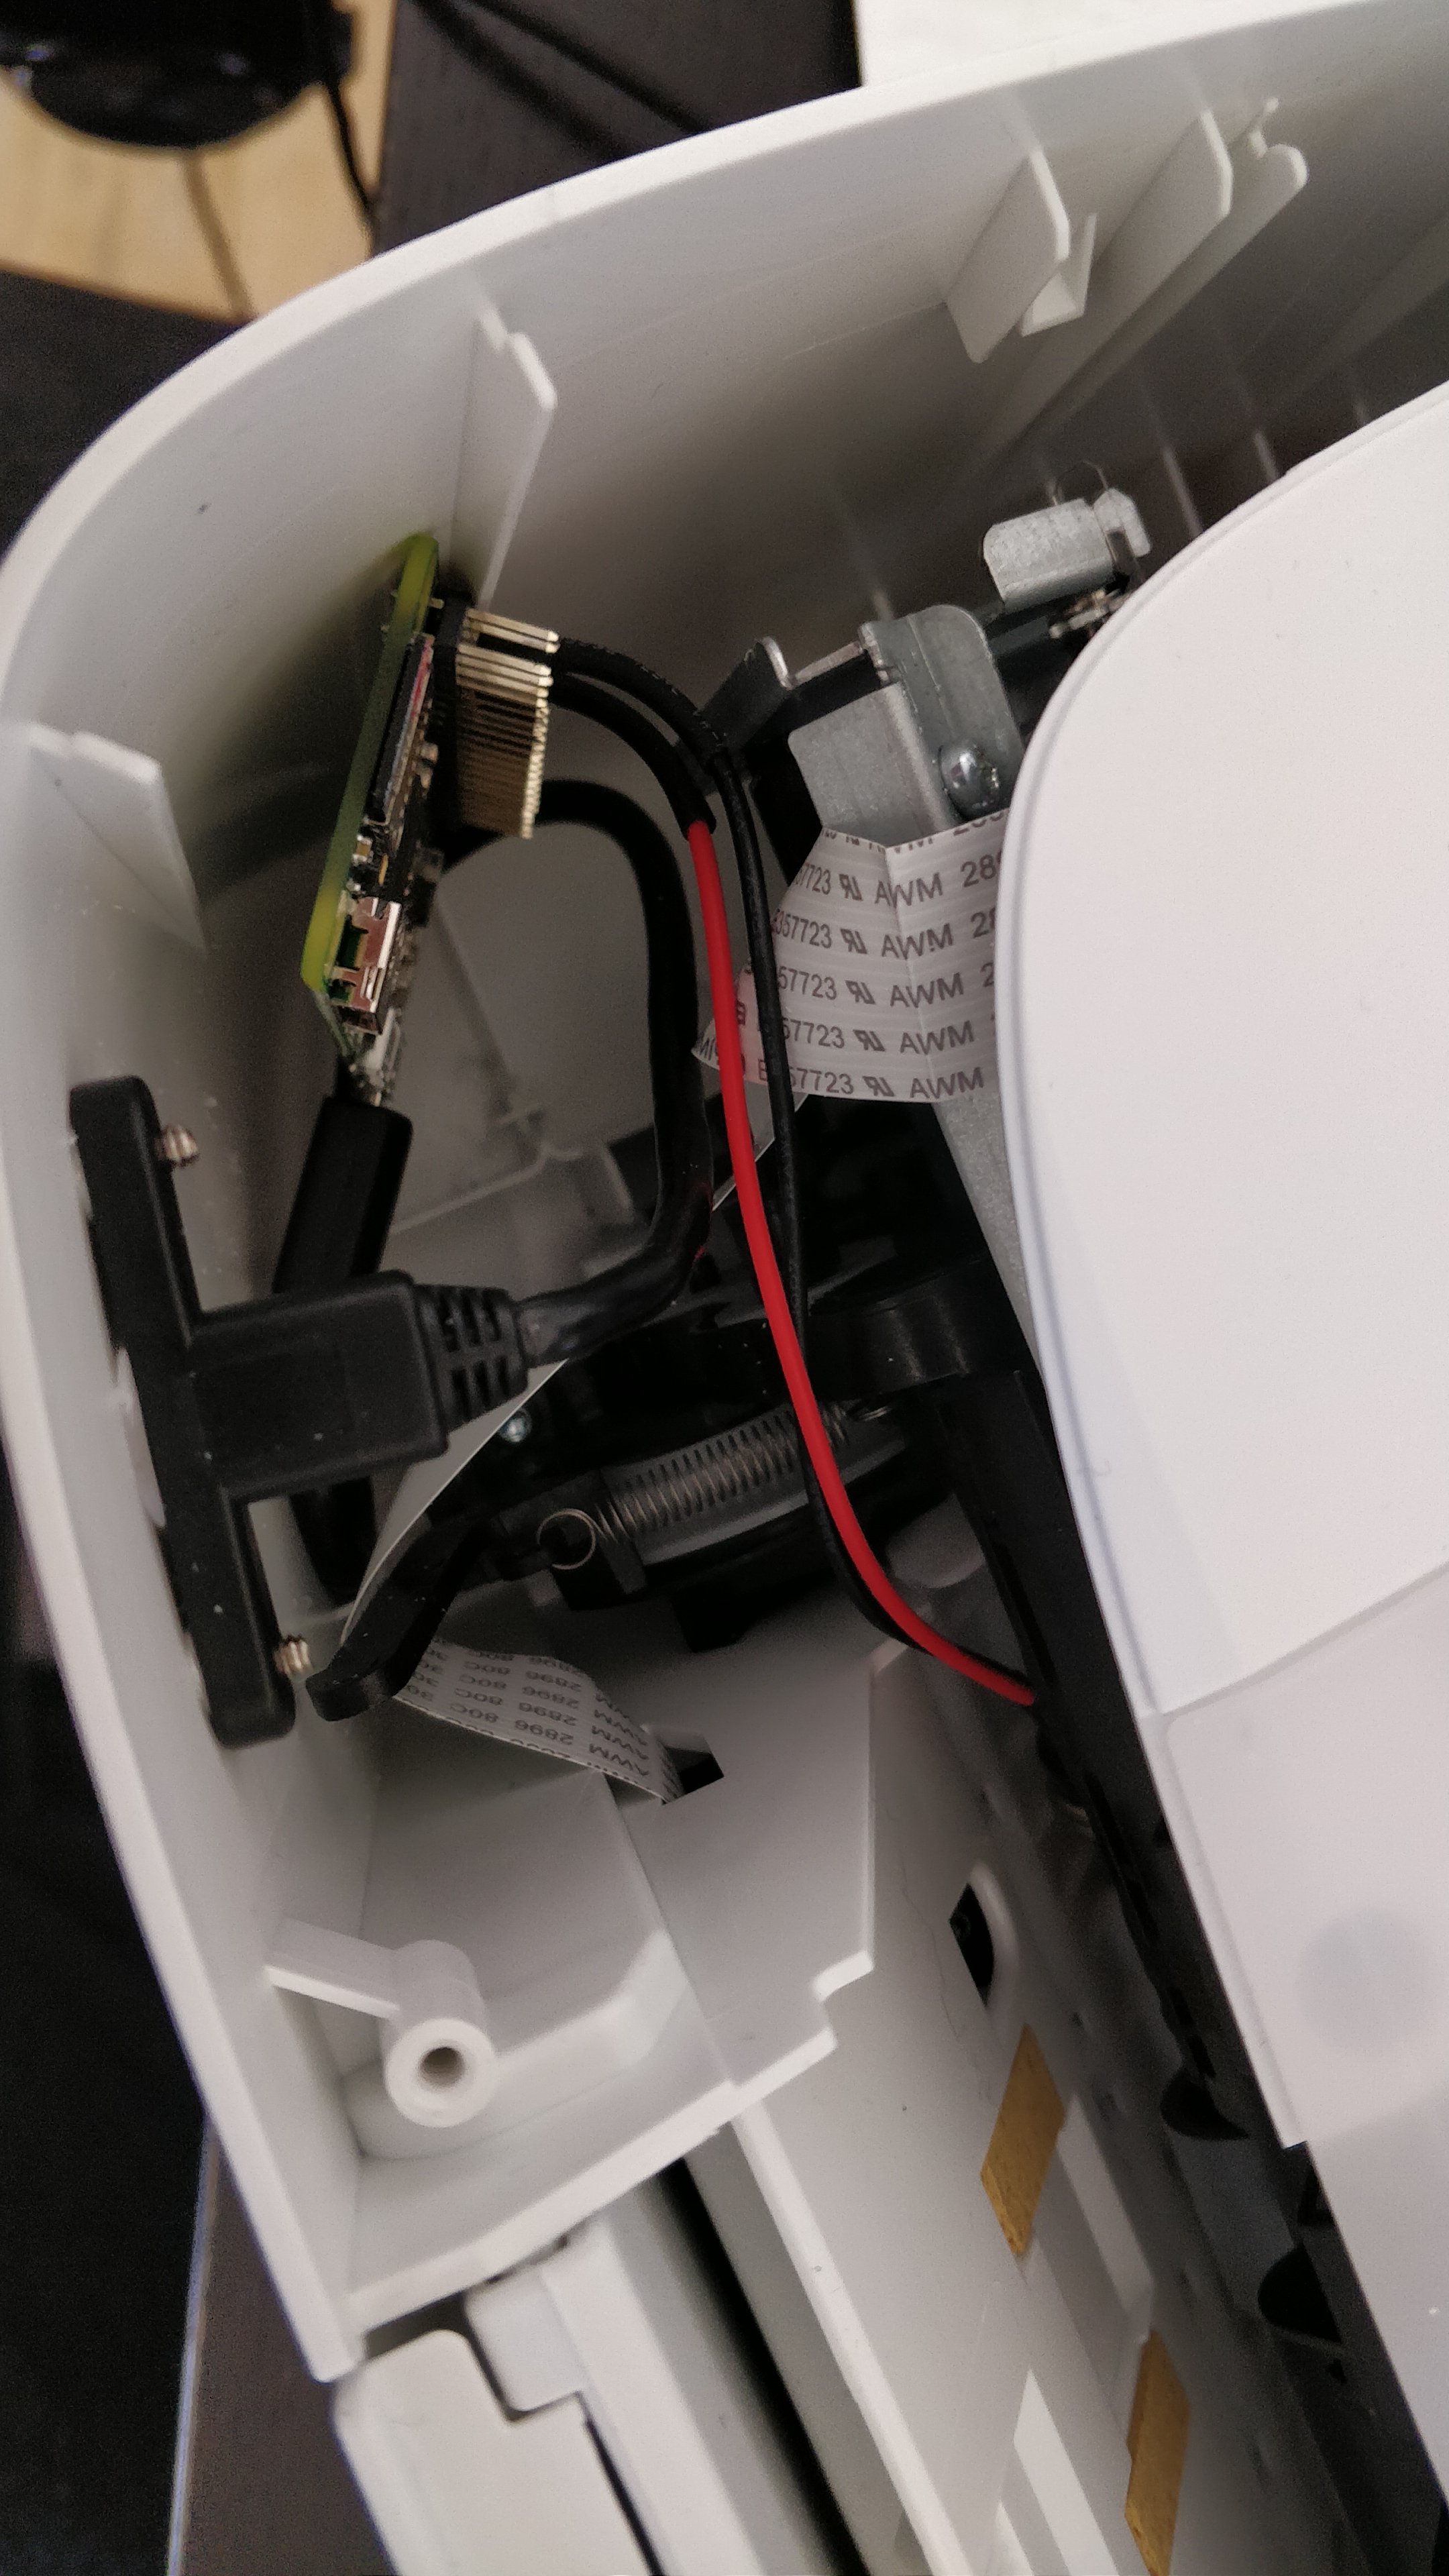 An open printer, with a raspberry pi crammed into it